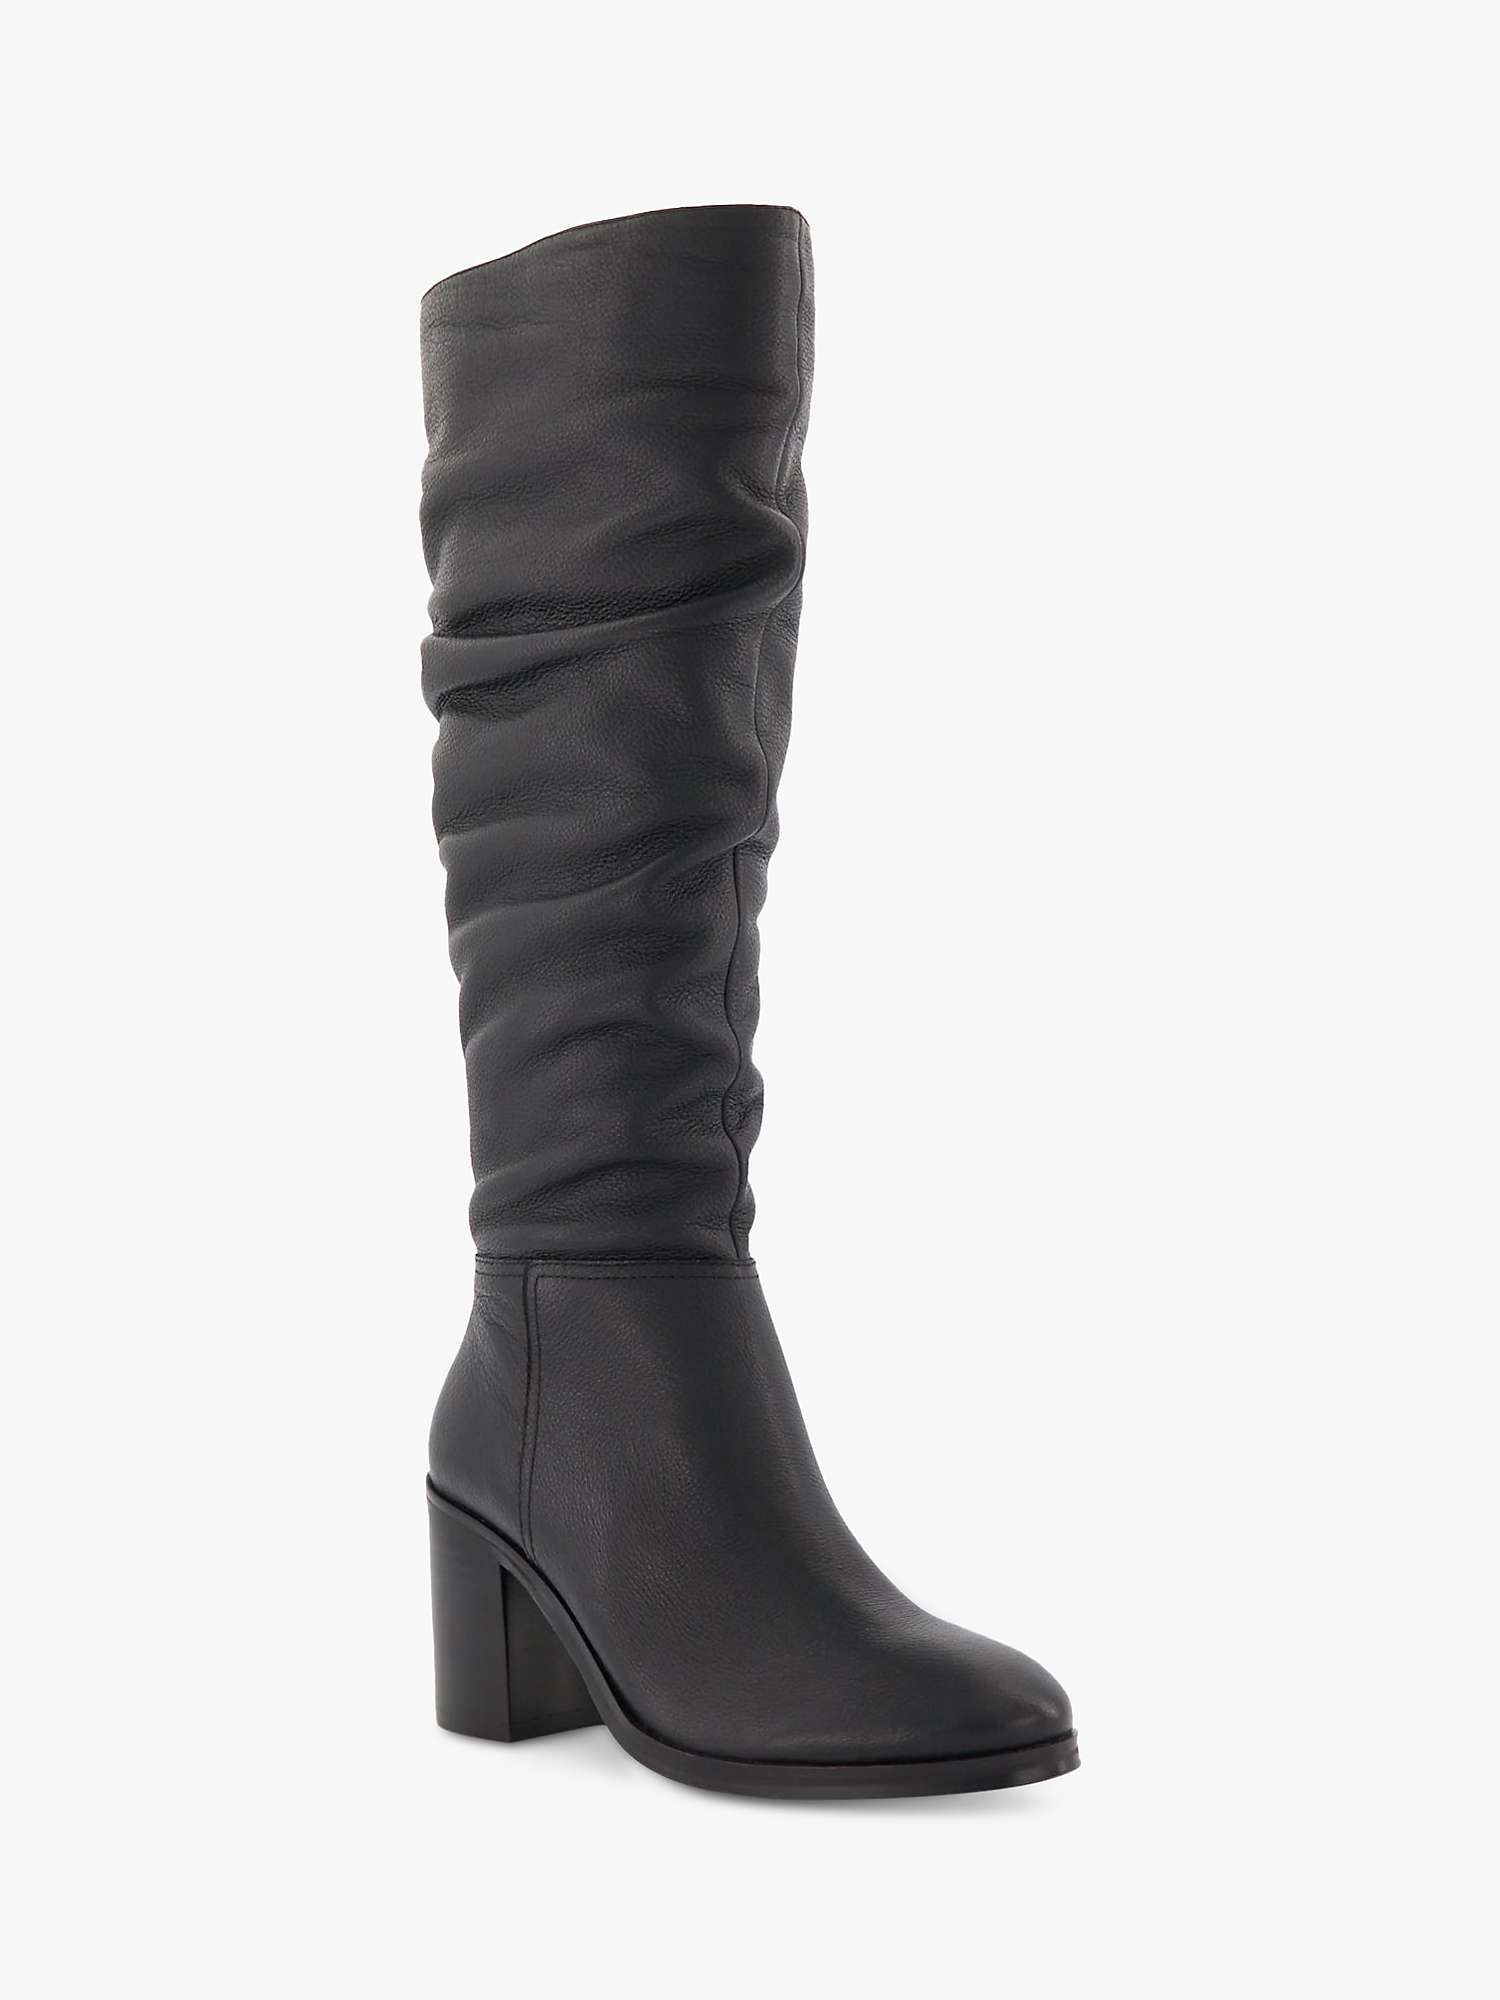 Buy Dune Truce Leather Ruched Block Heel Boots, Black Online at johnlewis.com